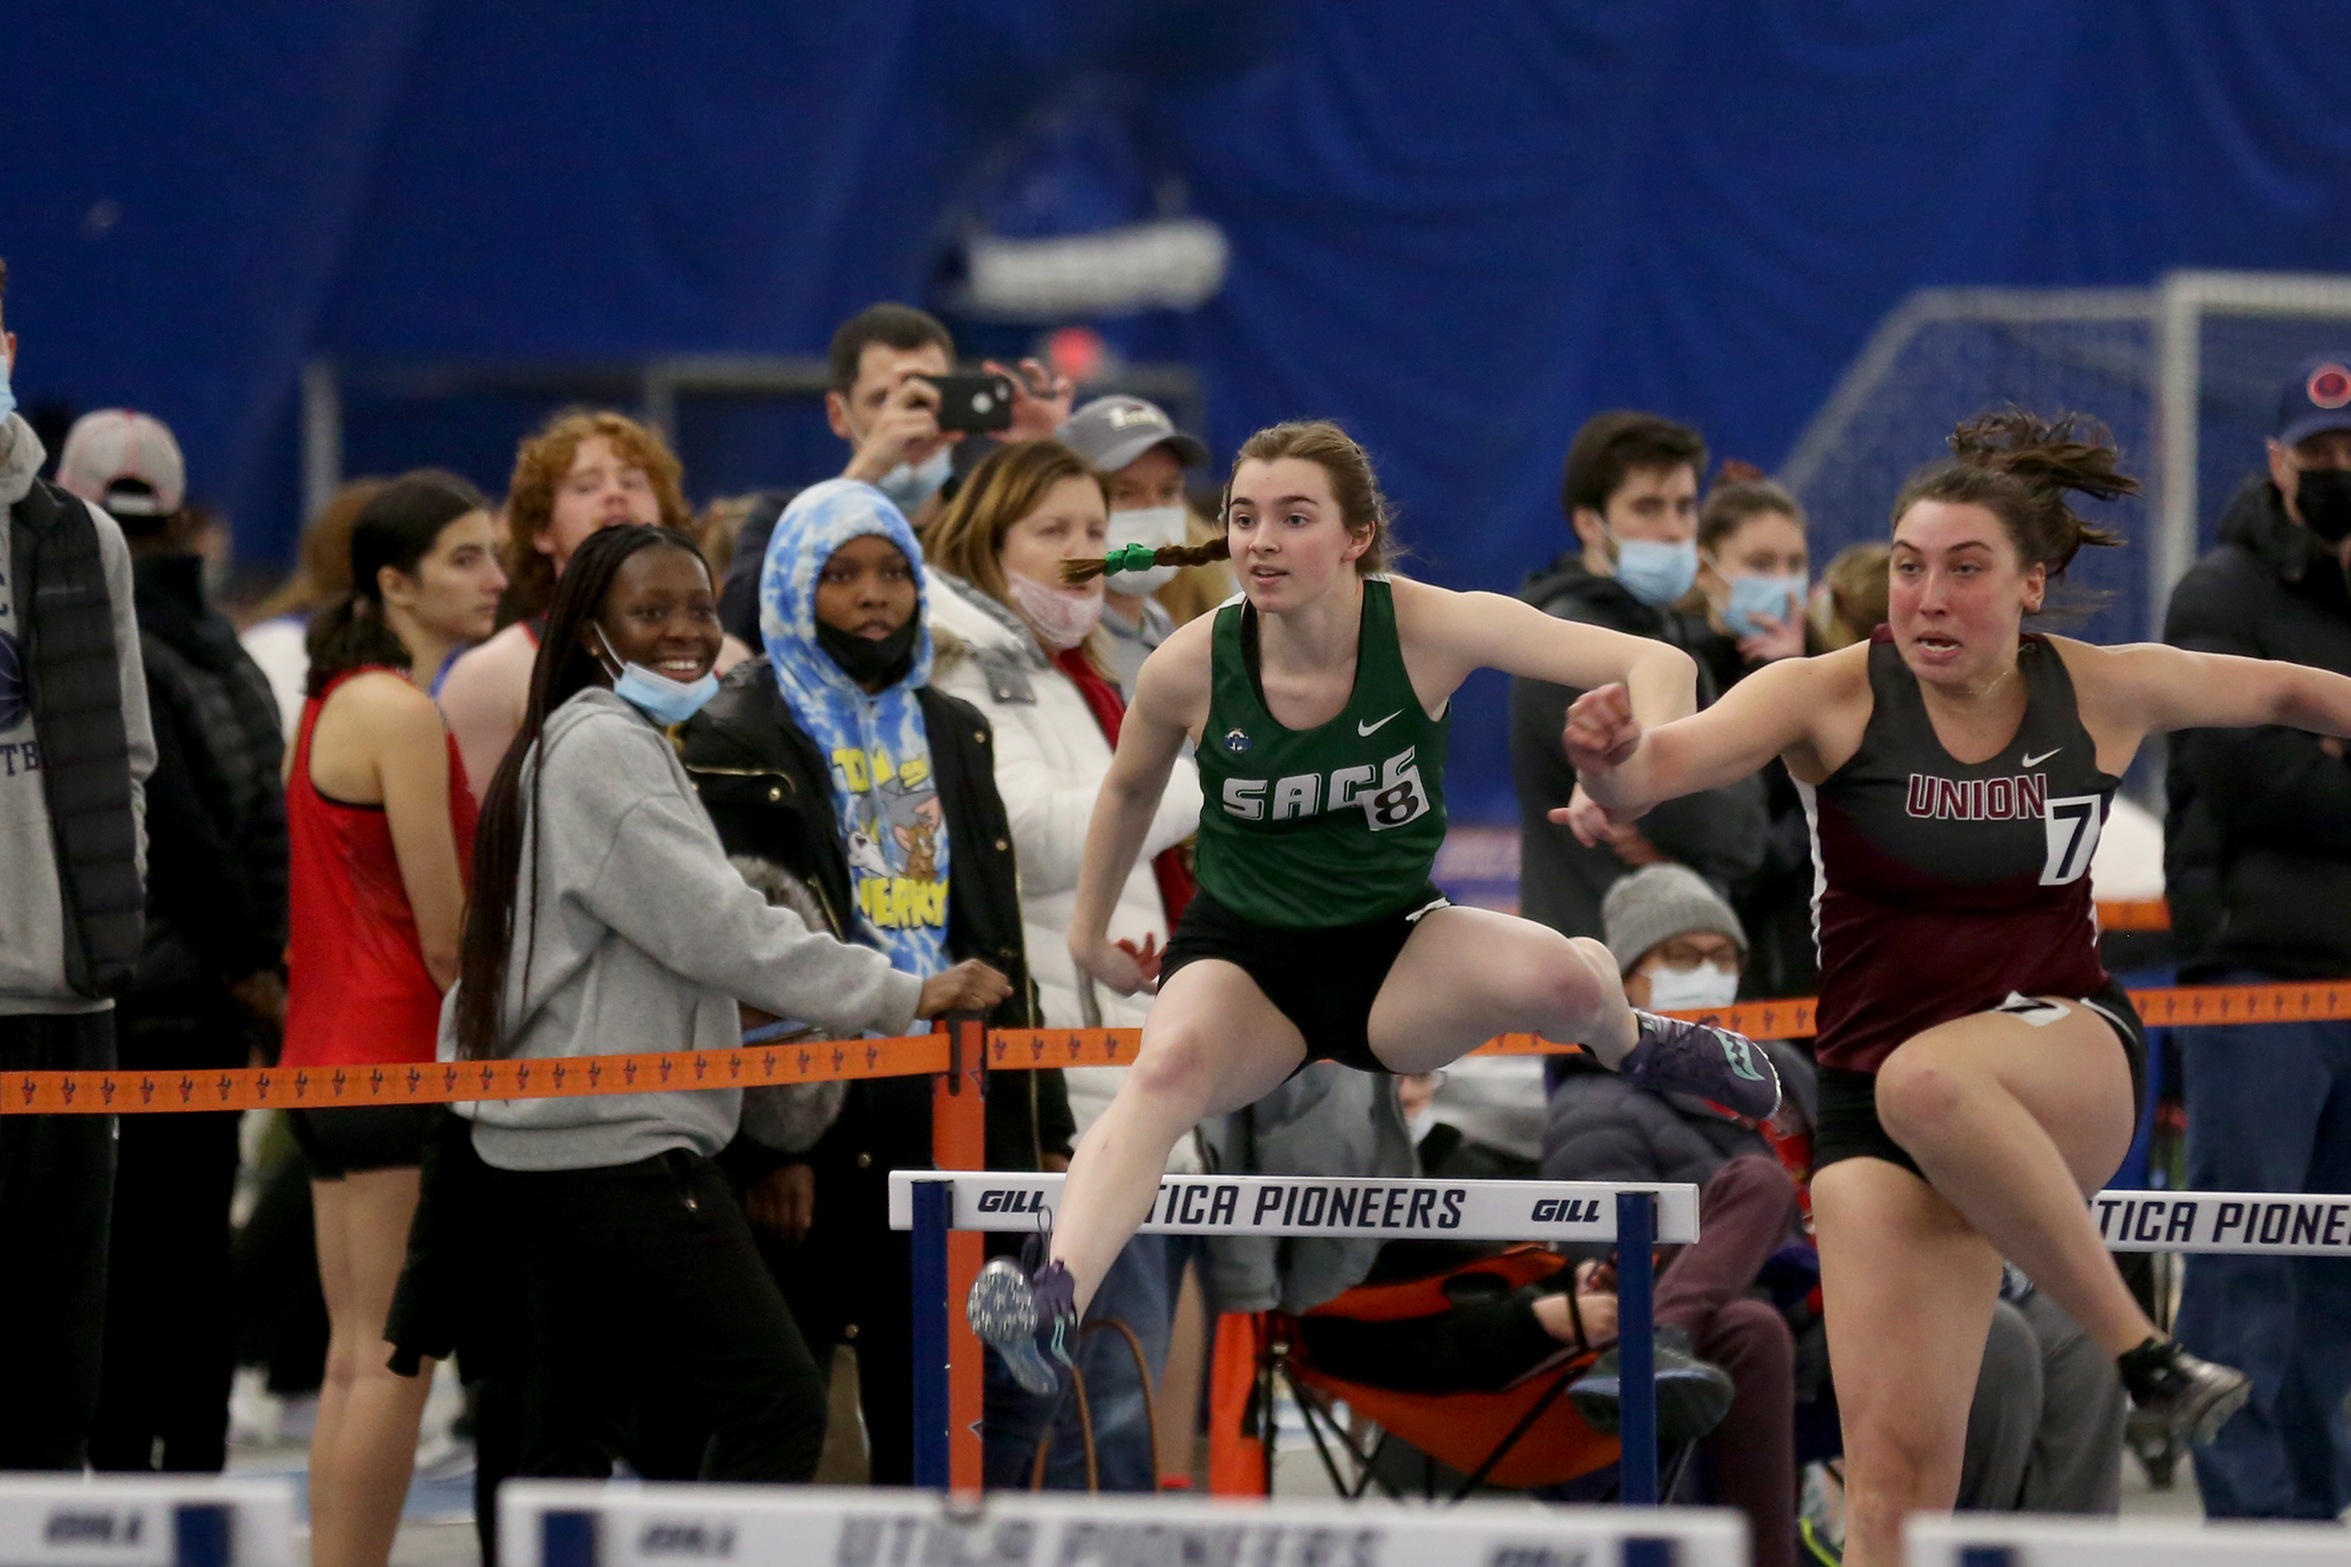 Record-setting day for RSC Women's Track Team at Opening Day of E8 Championship